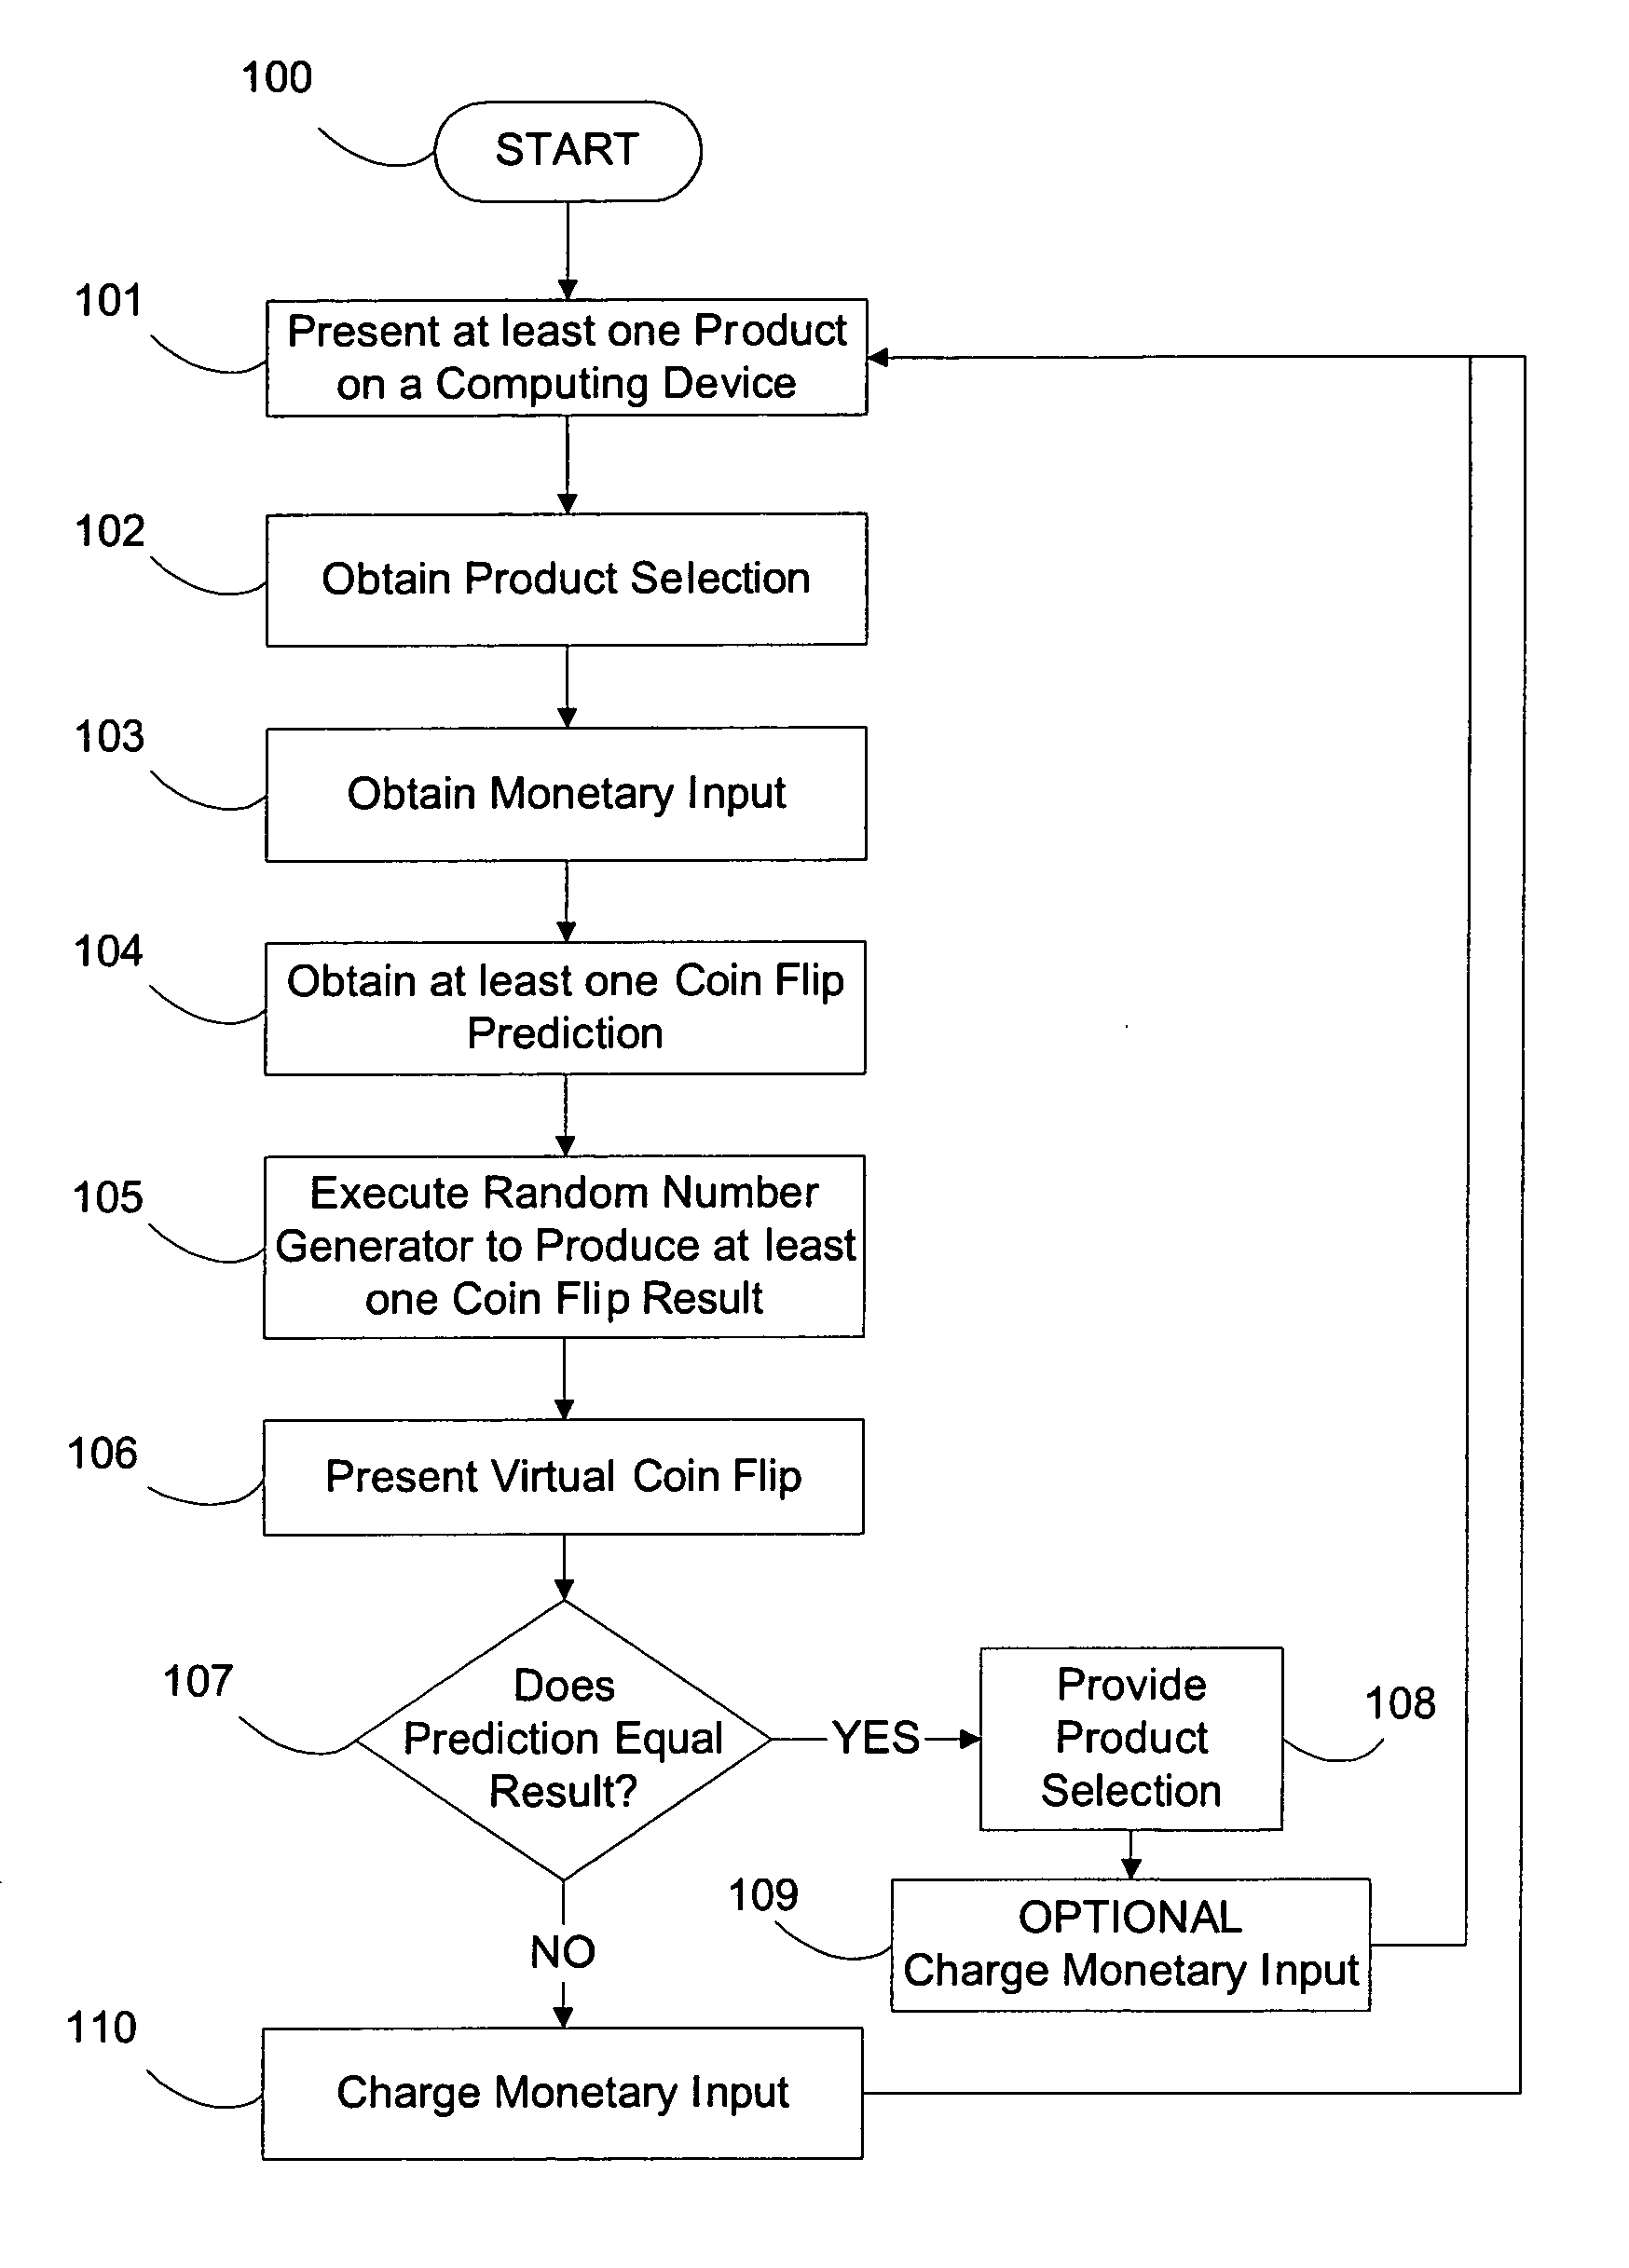 Method for completing an electronic commerce transaction based on a virtual coin flip